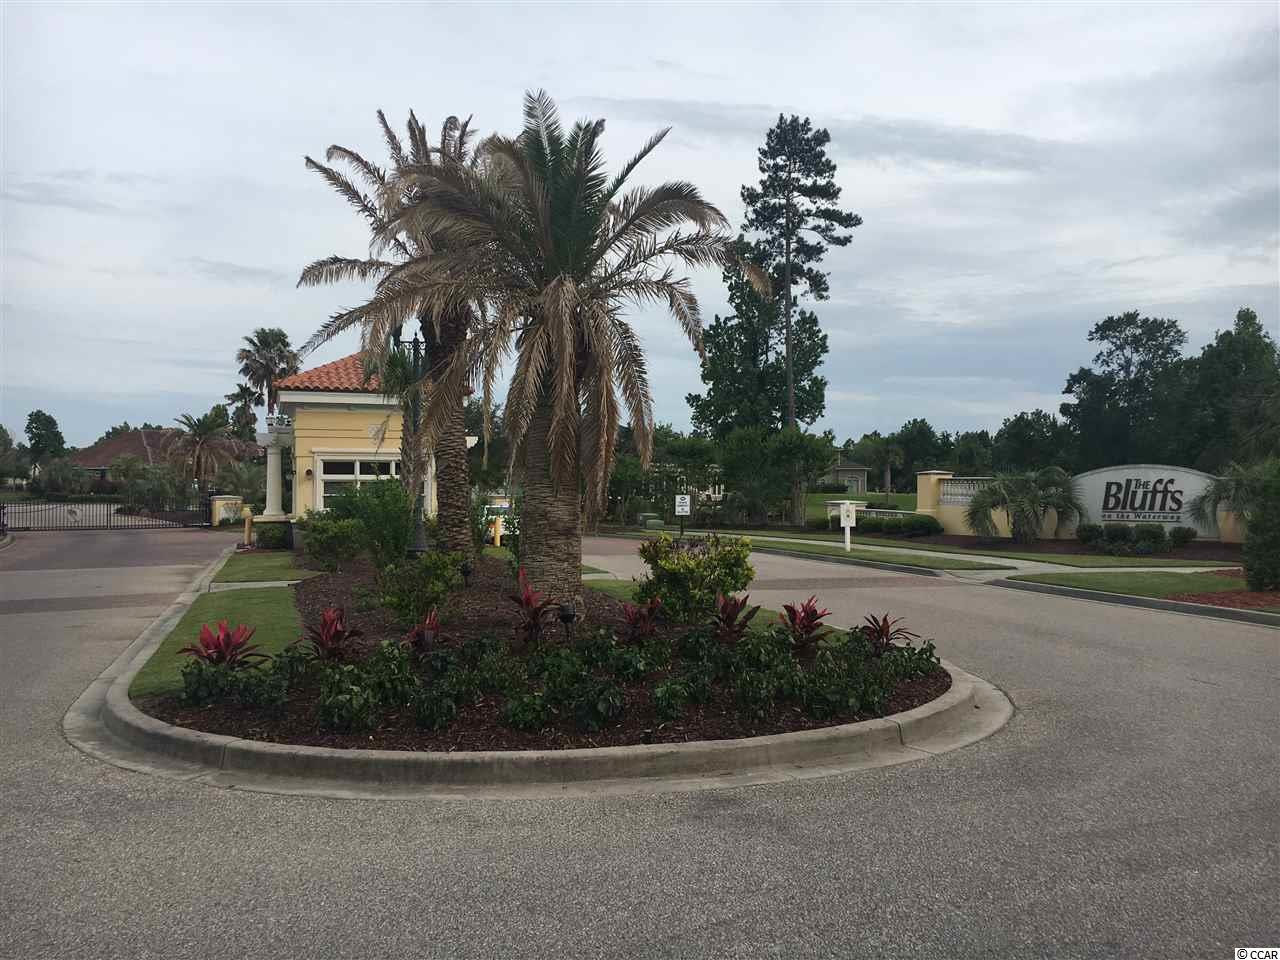 Lot 130 Ave. of the Palms Myrtle Beach, SC 29579